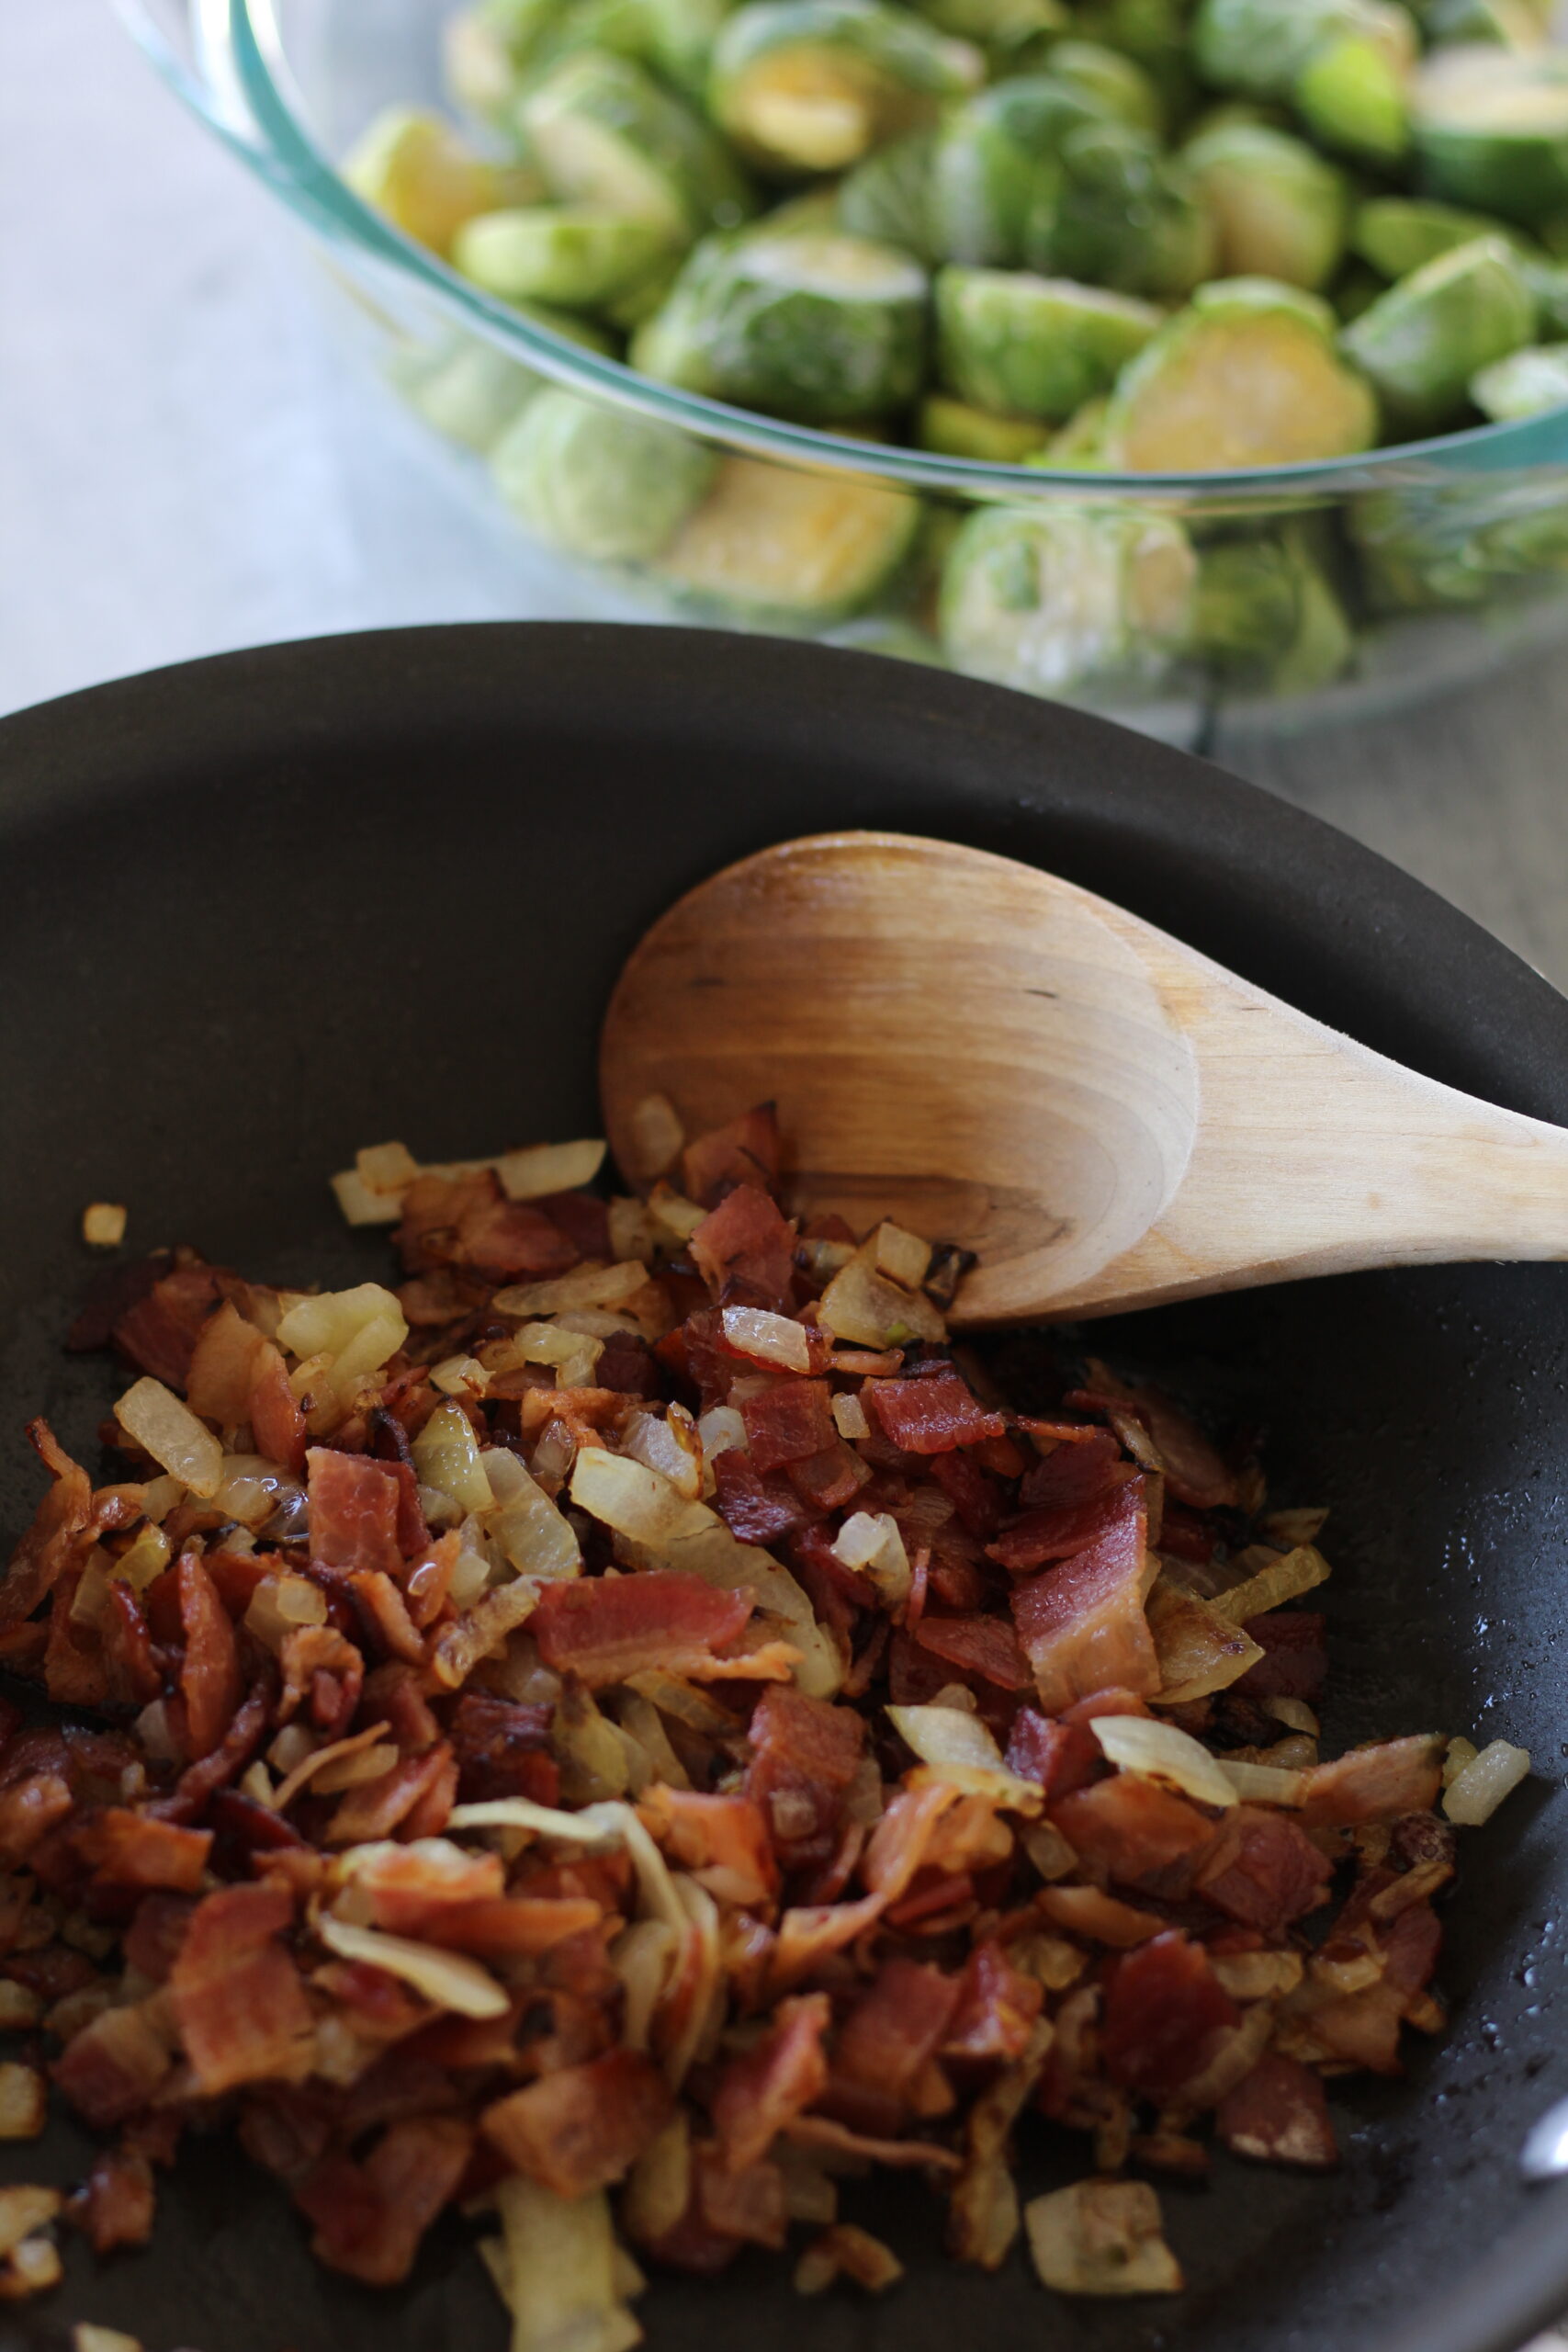 Cook the bacon and onion 